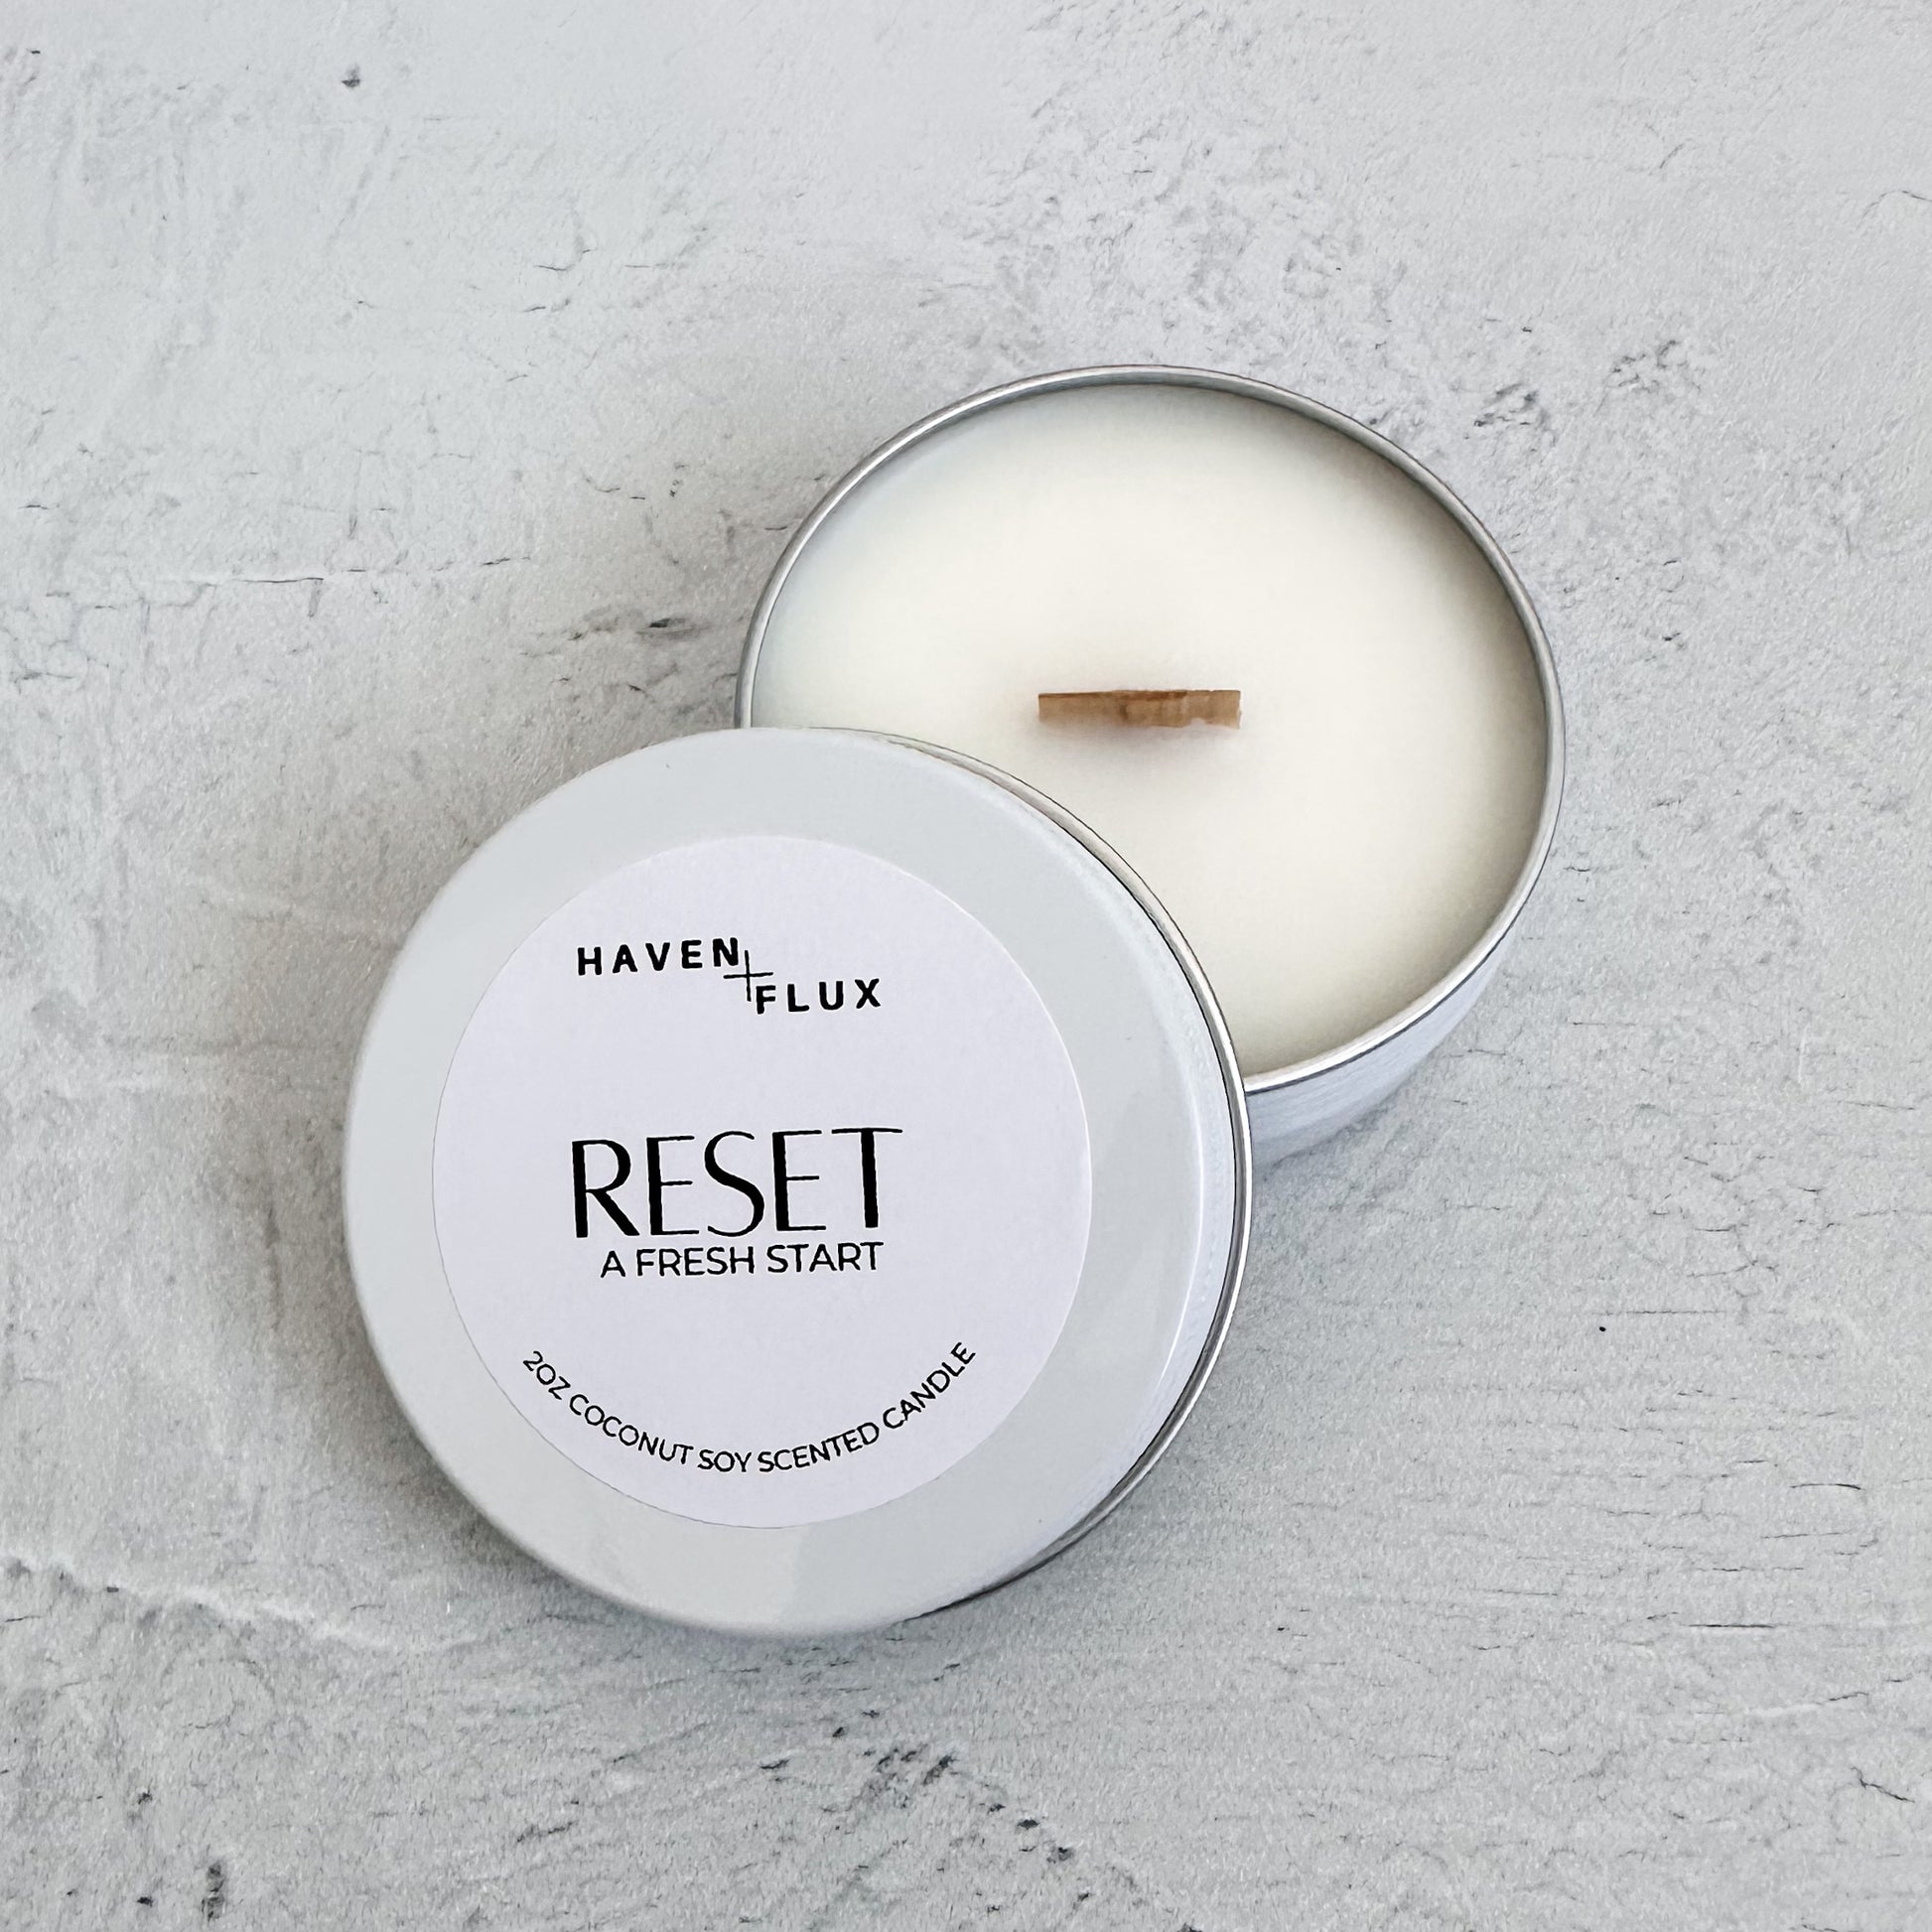 Reset, A Fresh Start Non-Toxic Coconut Soy Wax Wooden Wick Intention 2oz Sample Candle for Mental Health